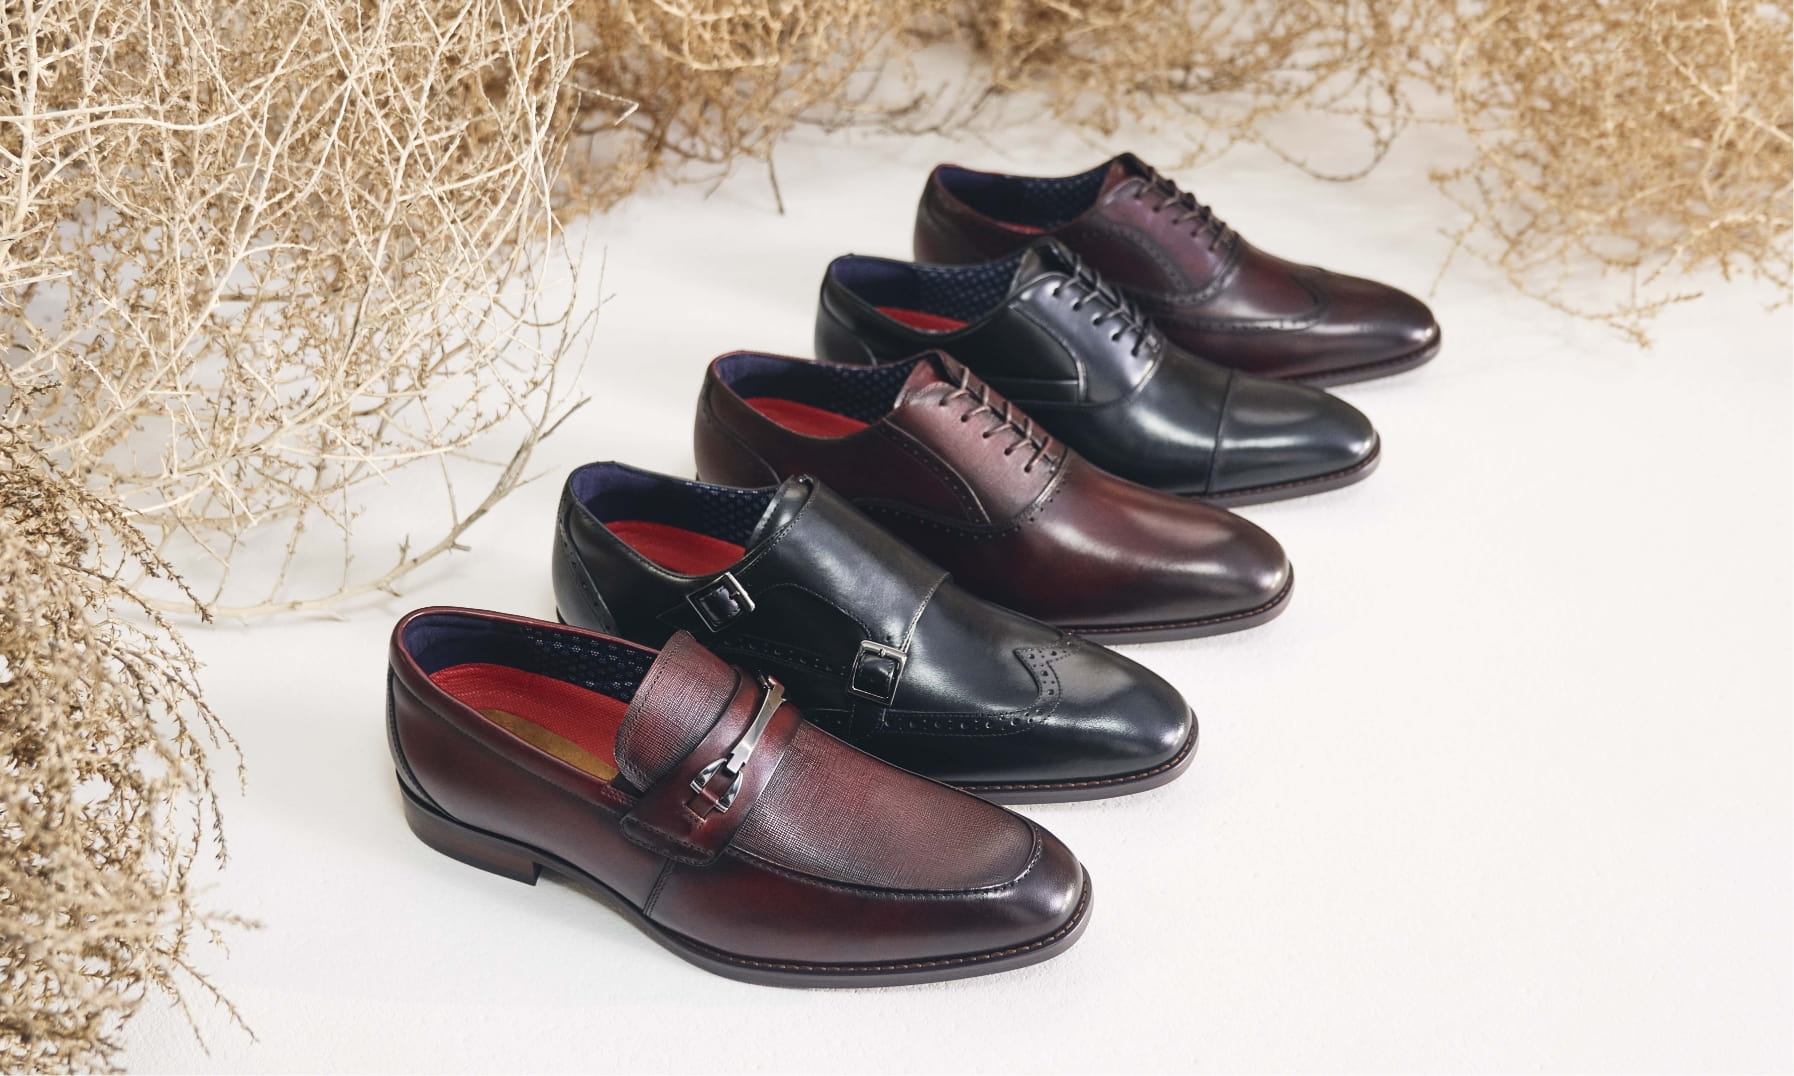 Men's Dress Shoes, Casual Shoes, Clothing & Accessories | Stacy Adams